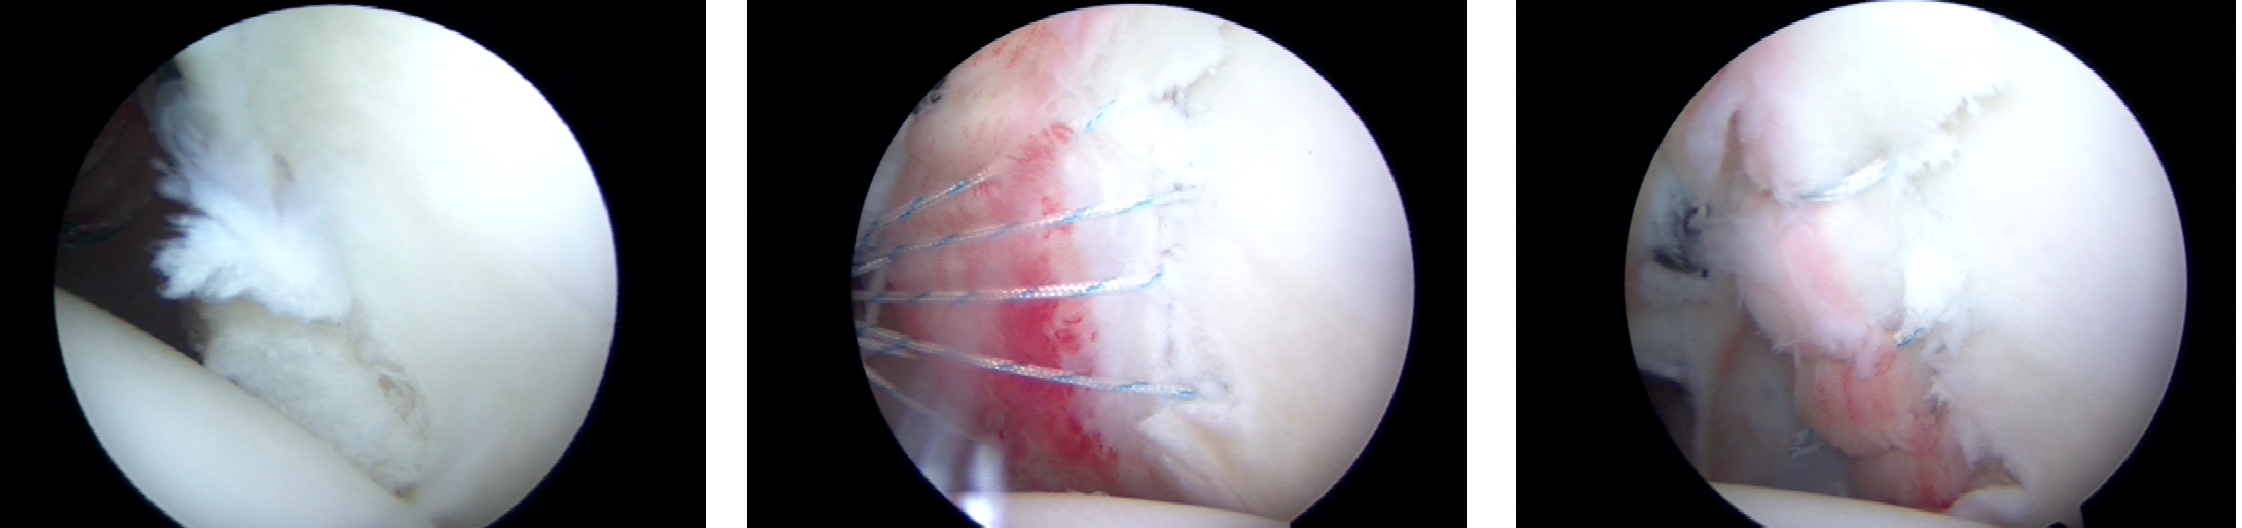 Arthroscopic View of Right Shoulder posterior Bankart tear associated with a posterior shoulder dislocation